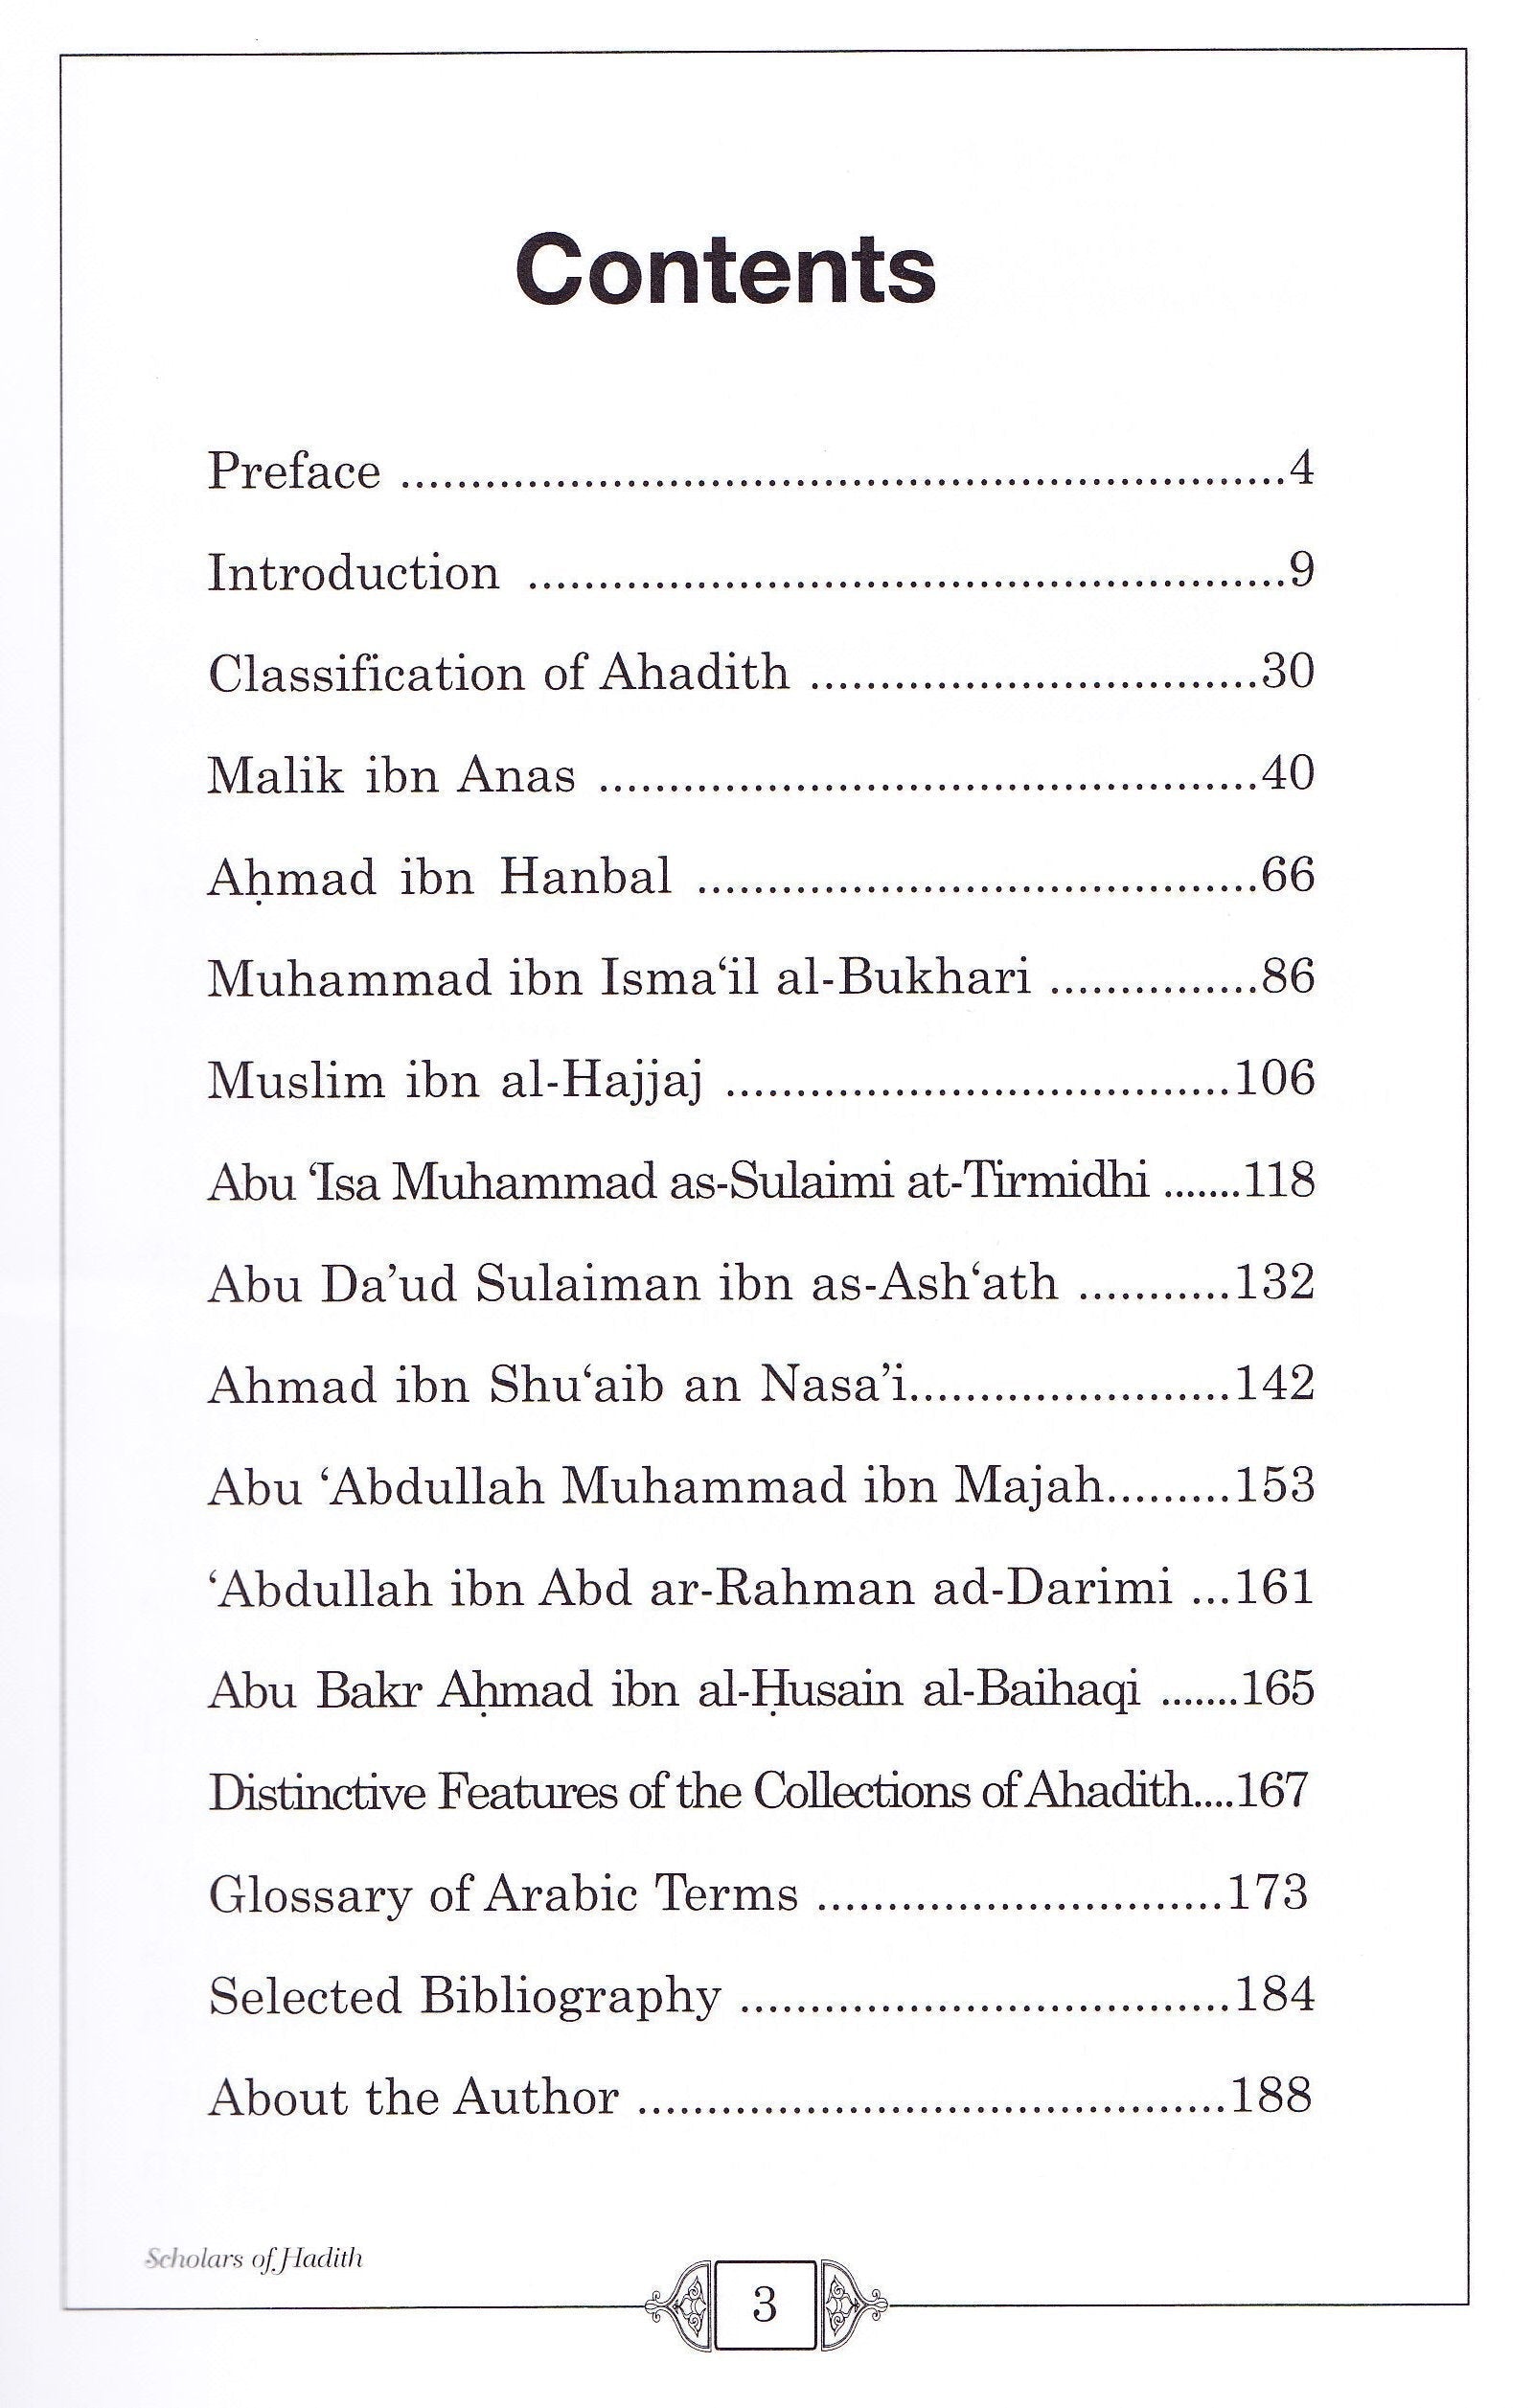 Scholars of Hadith - Premium Textbook from IQRA' international Educational Foundation - Just $4! Shop now at IQRA Book Center | A Division of IQRA' international Educational Foundation